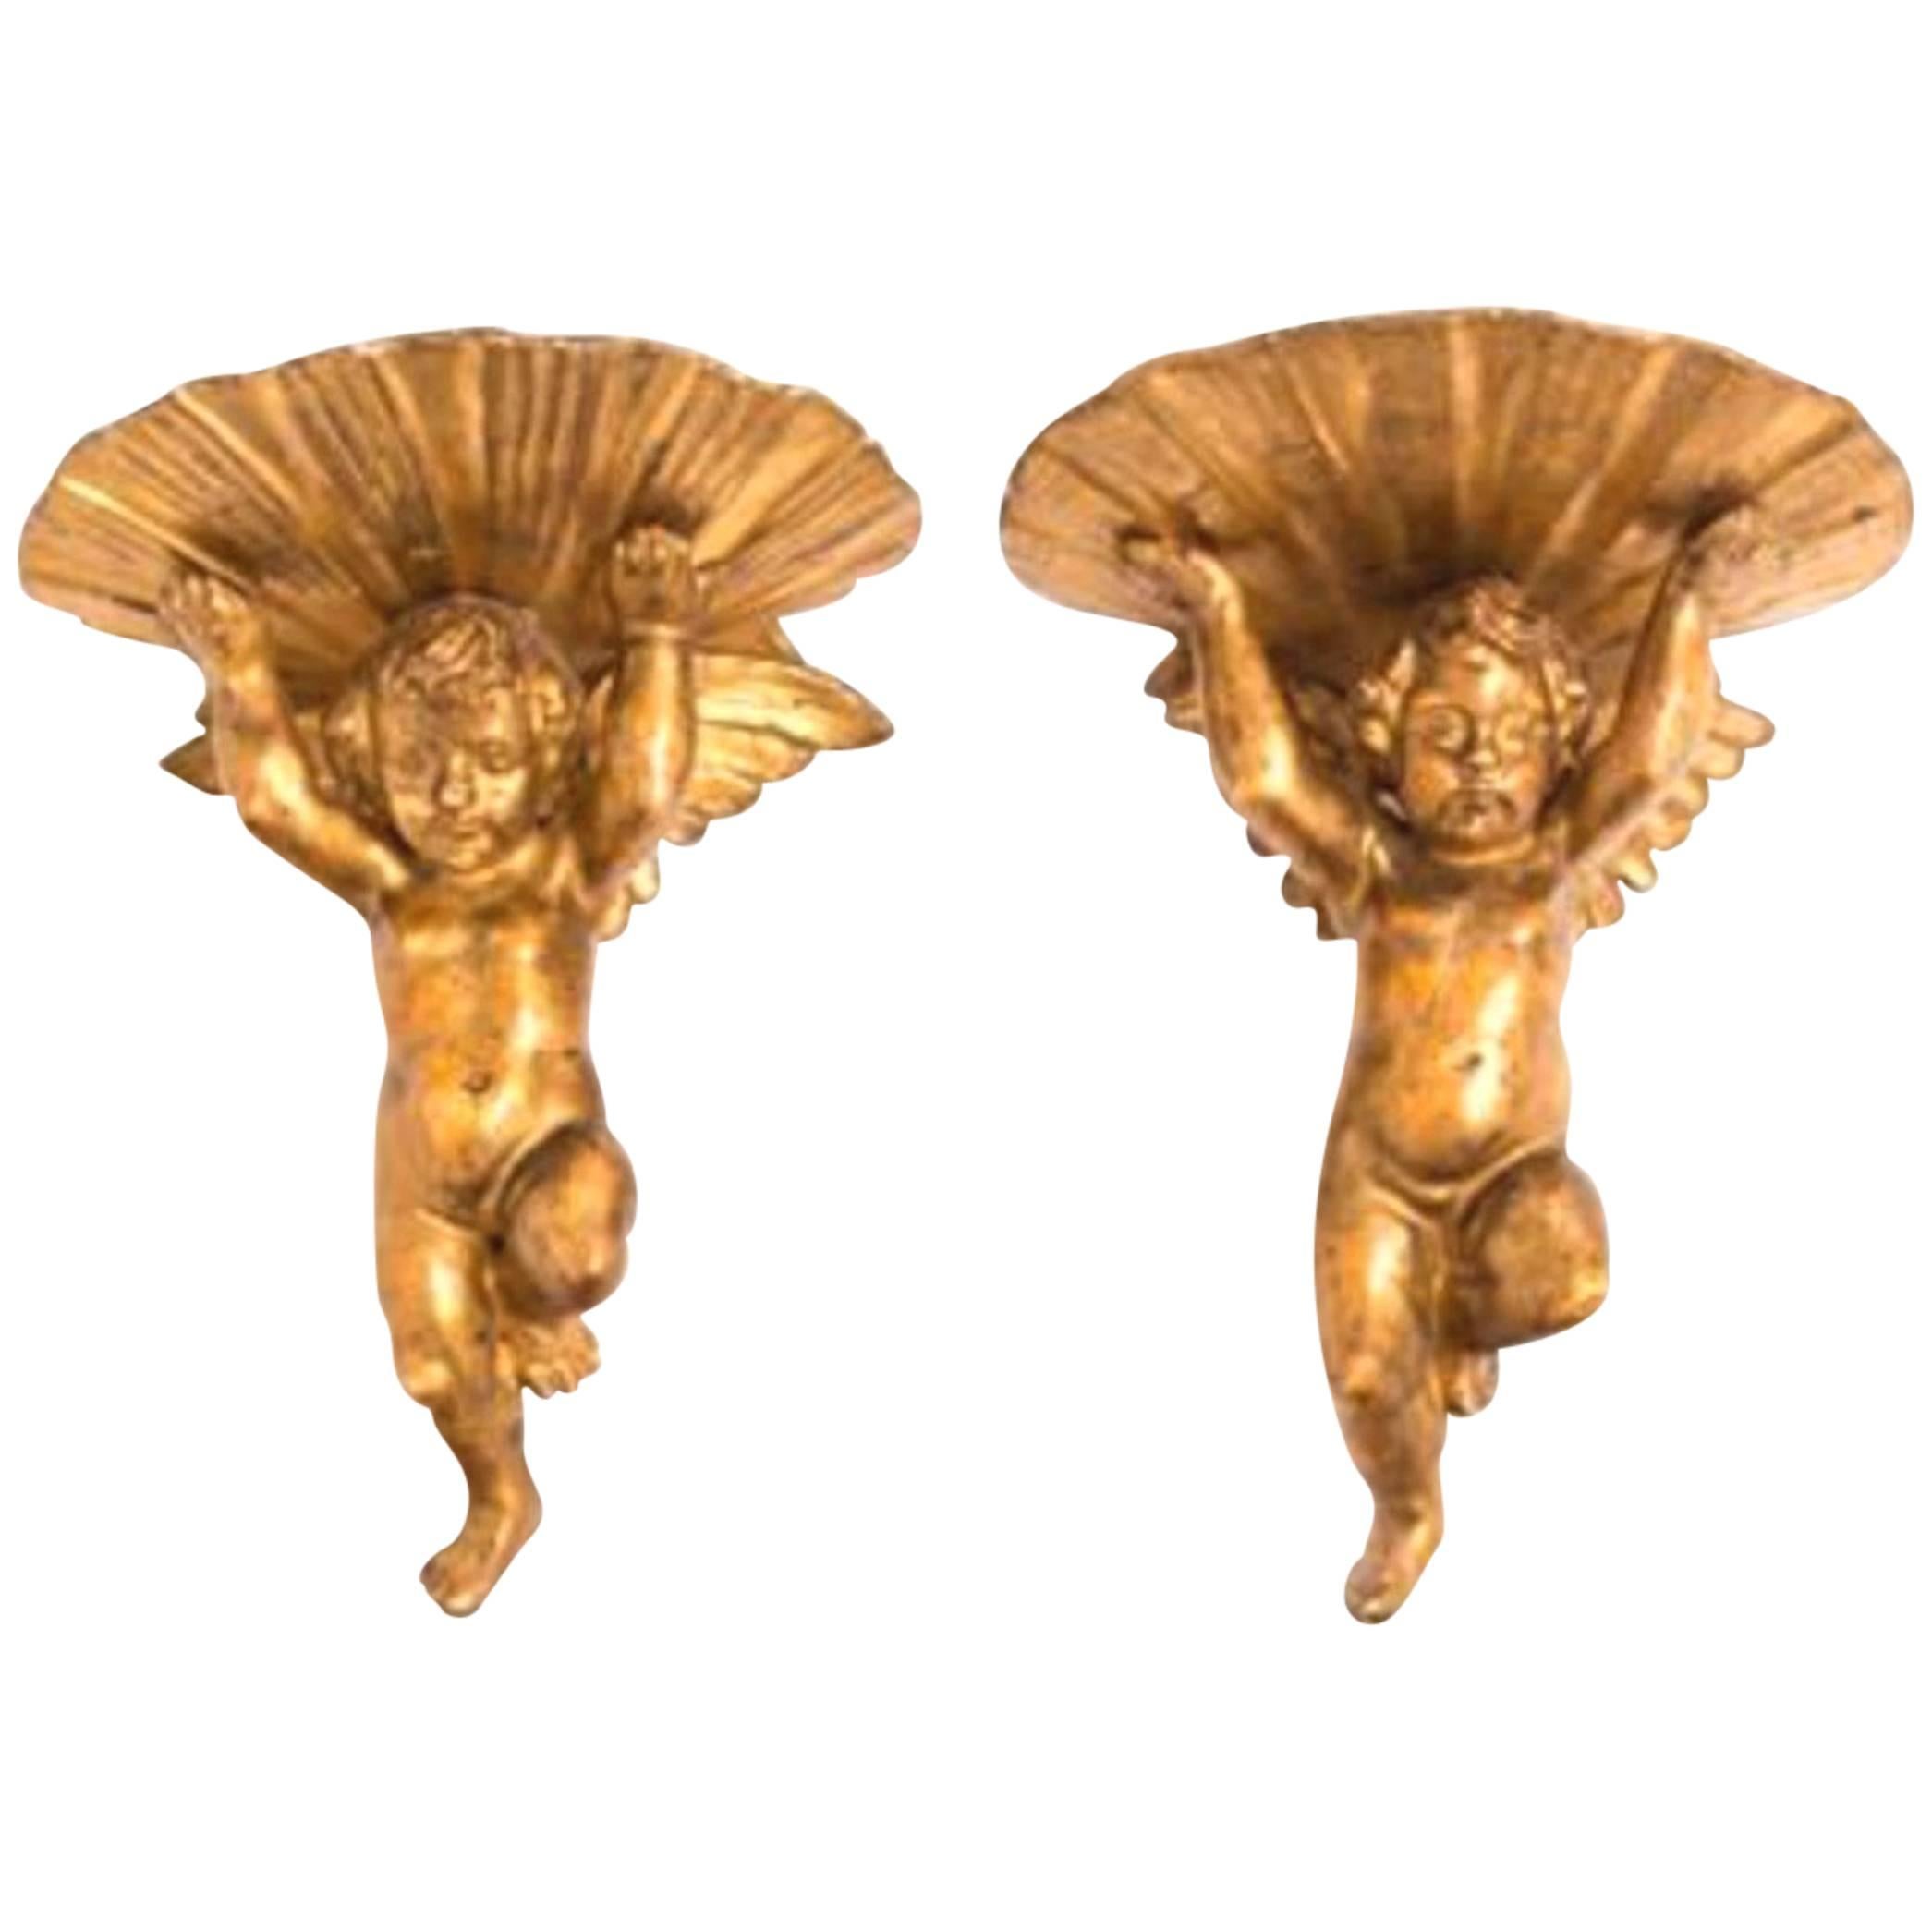 Charming Pair of 19th Century Italian Giltwood Brackets, Putti Supporting Shell For Sale